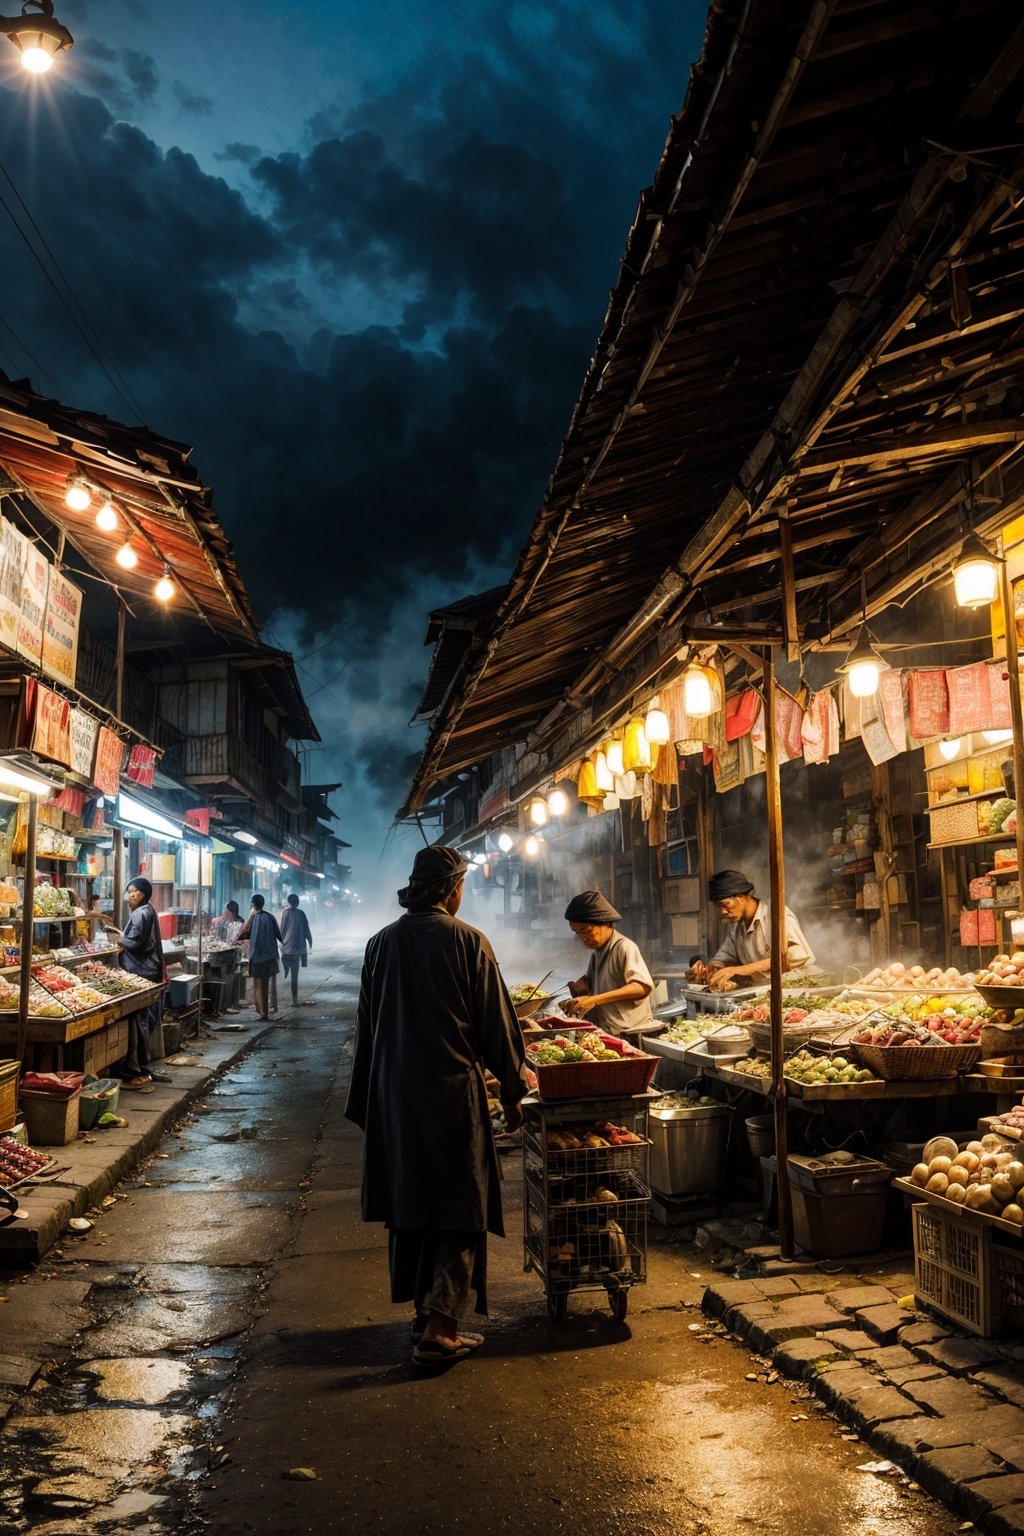 Street Vendor in the style of gauzy atmospheric landscapes, traditional Indonesian market atmosphere, misty, foggy, moody, blue hour 